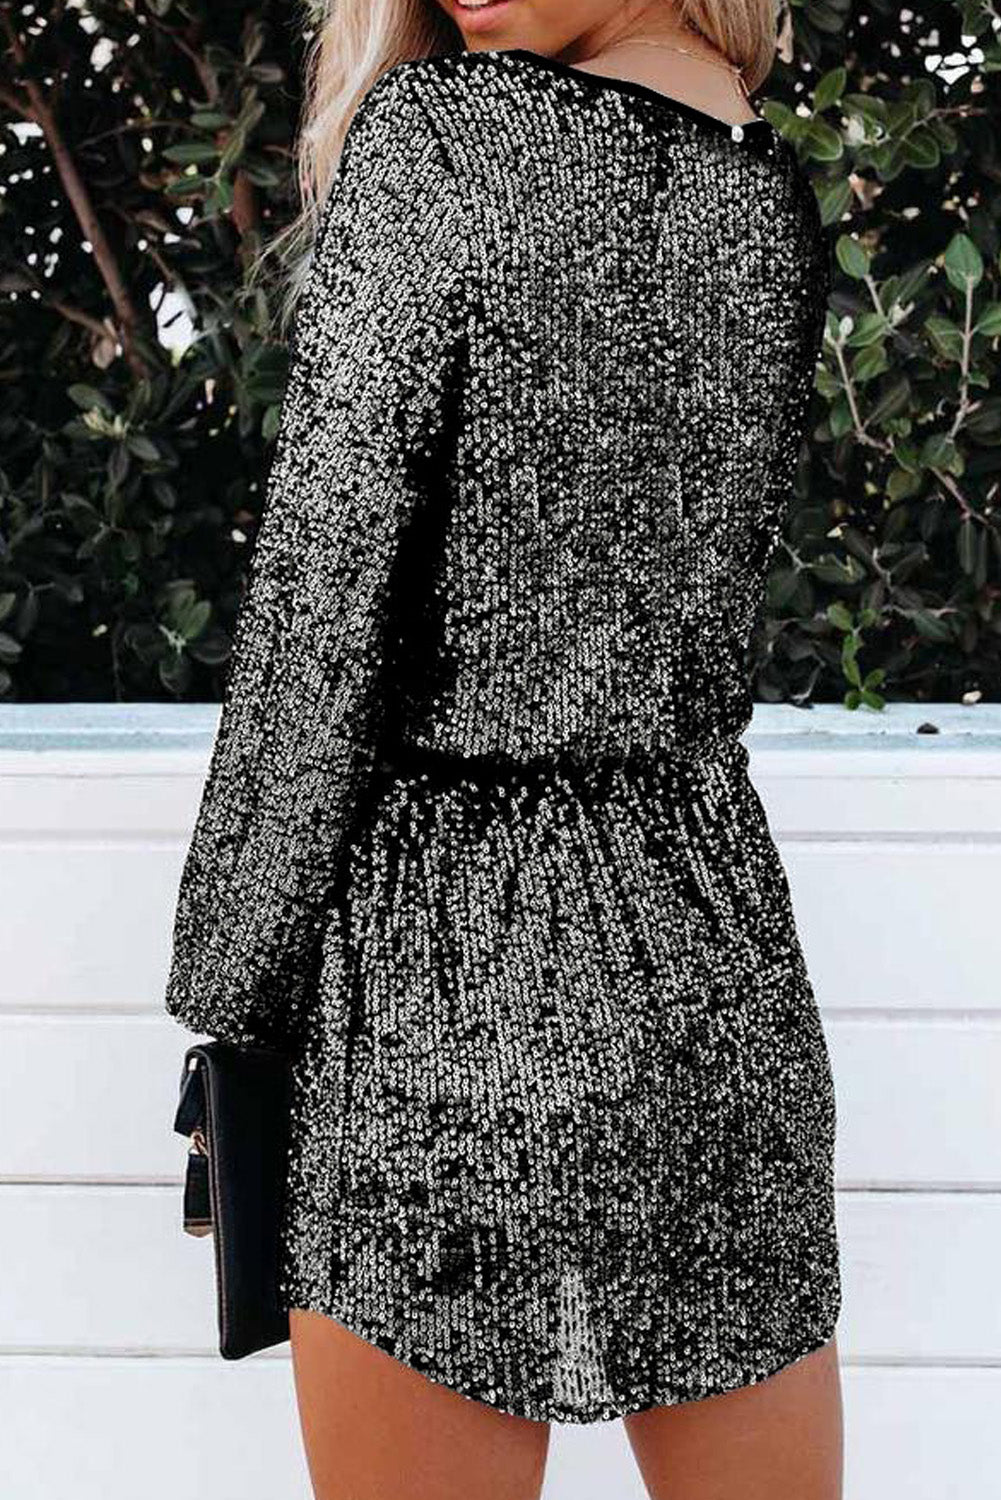 Silvery Loose Long Sleeve Sequin Dress with Sash